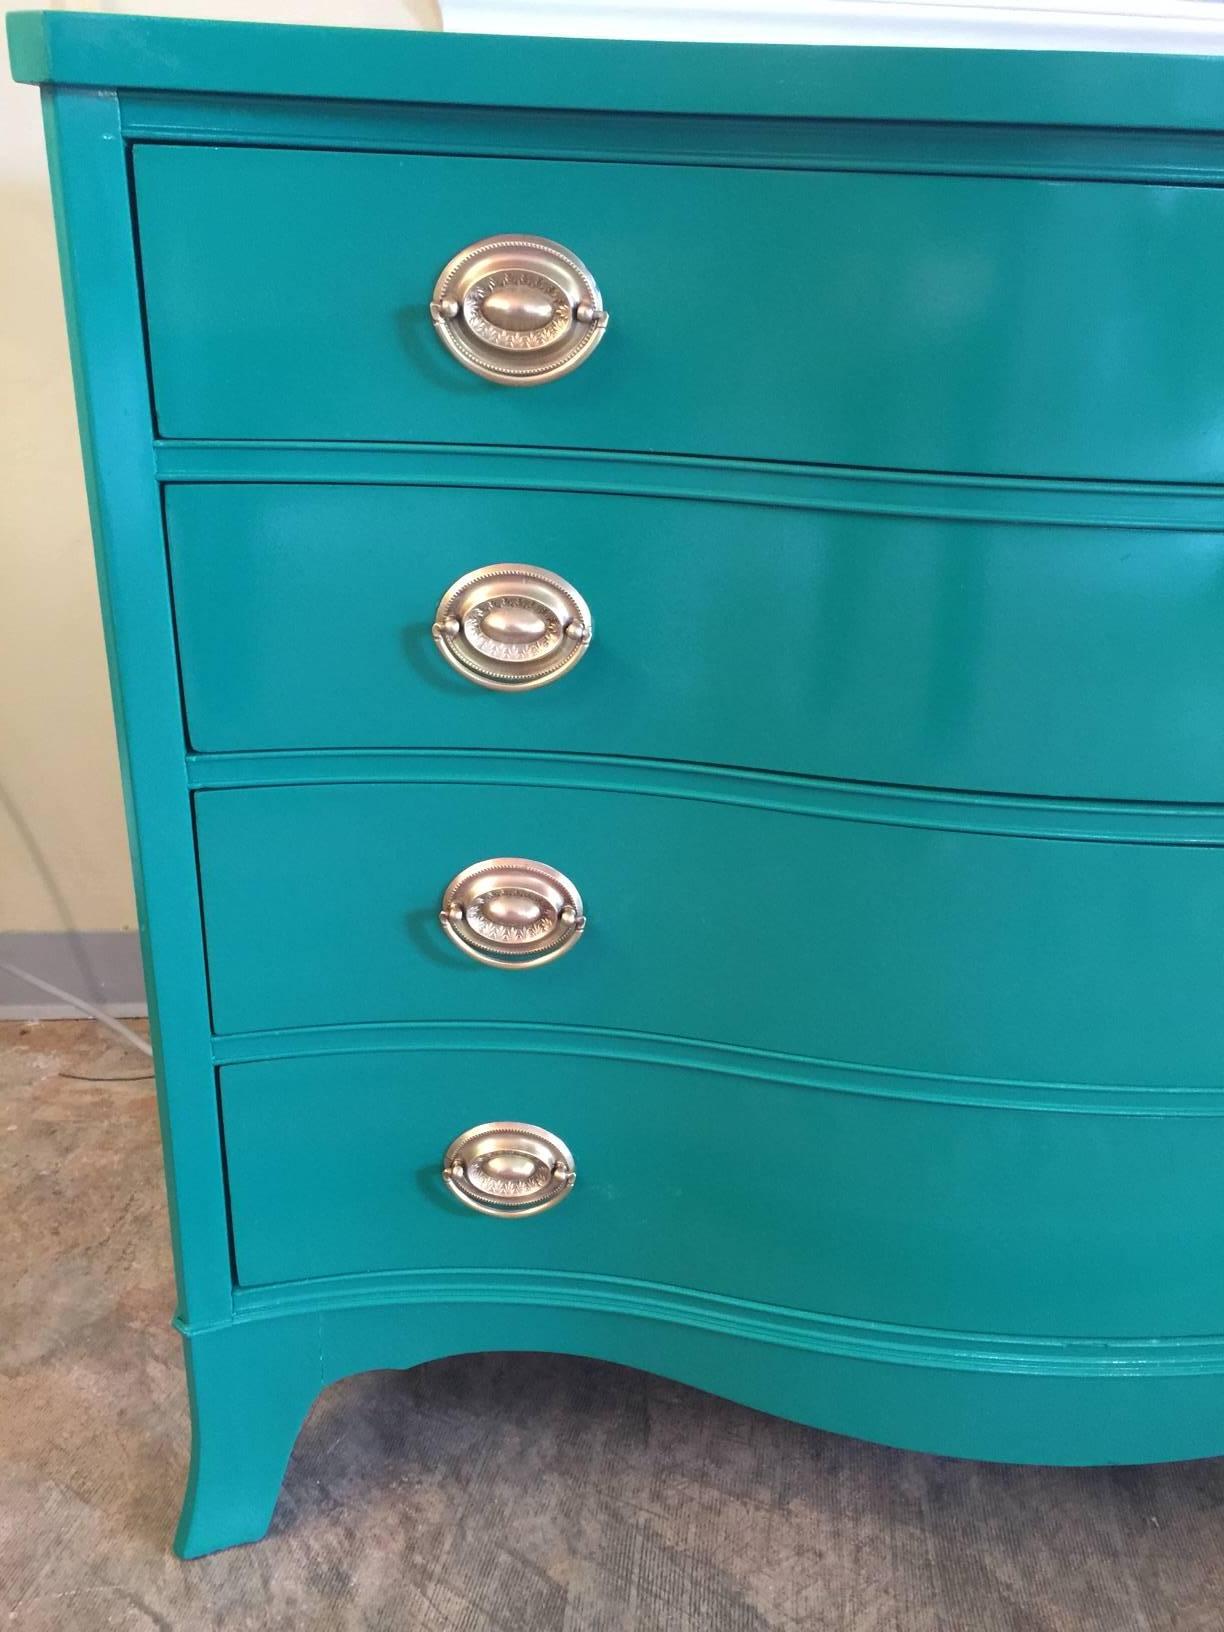 This stunner in Ming Jade lacquer with gilded pulls is solid mahogany made in the 1950s. With four ample drawers, it can provide storage in a foyer, a bedroom, or a dining room. Curvy lines make it sleek yet elegant.